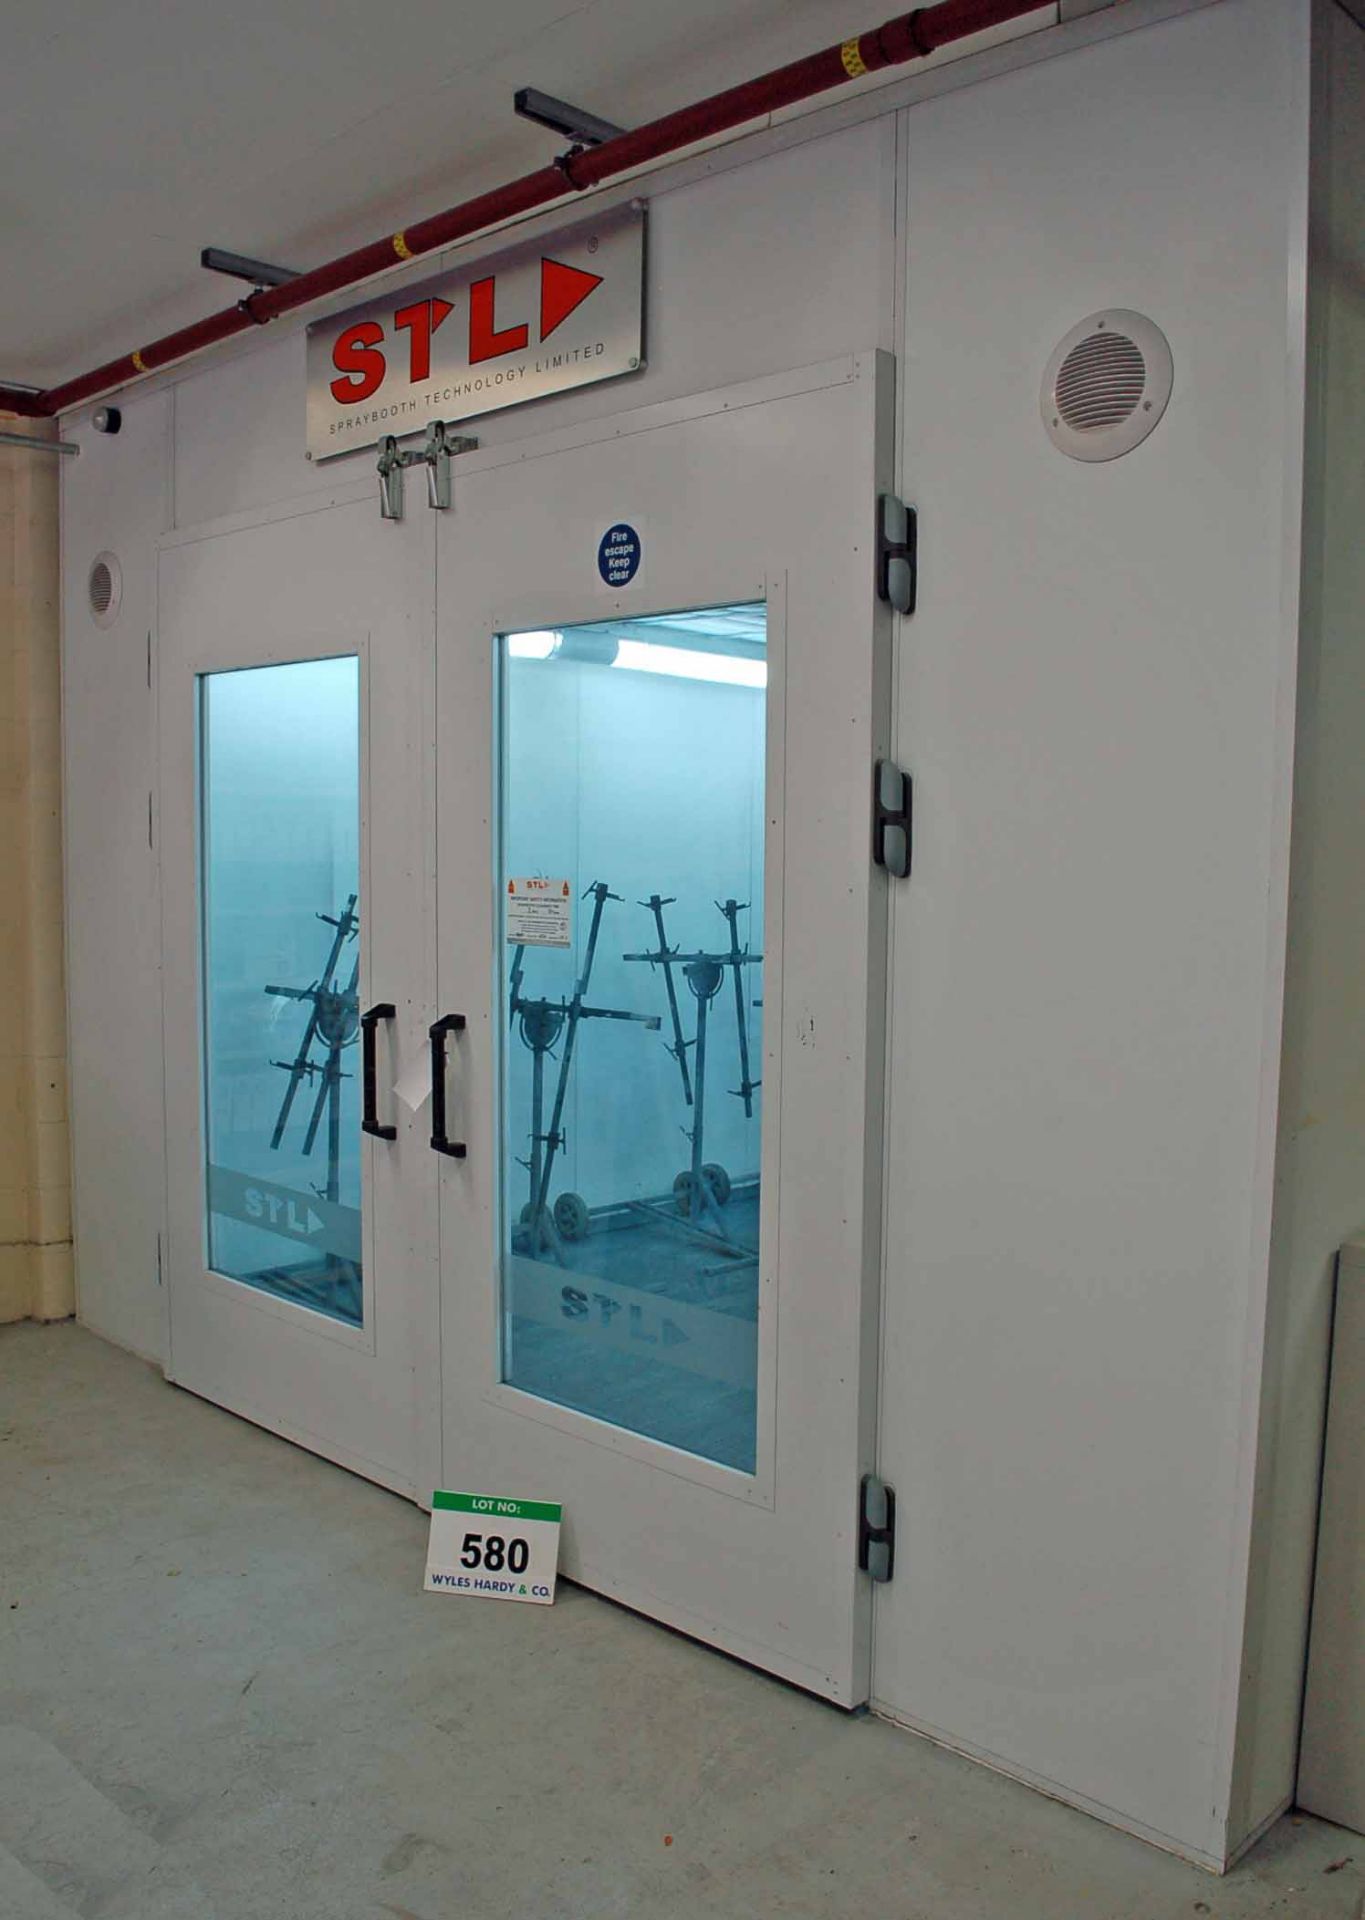 A SPRAYBOOTH TECHNOLOGY SERVICES 7M x 3.5M Approx. Gas Fired Free Standing, Sectional Paint Spray